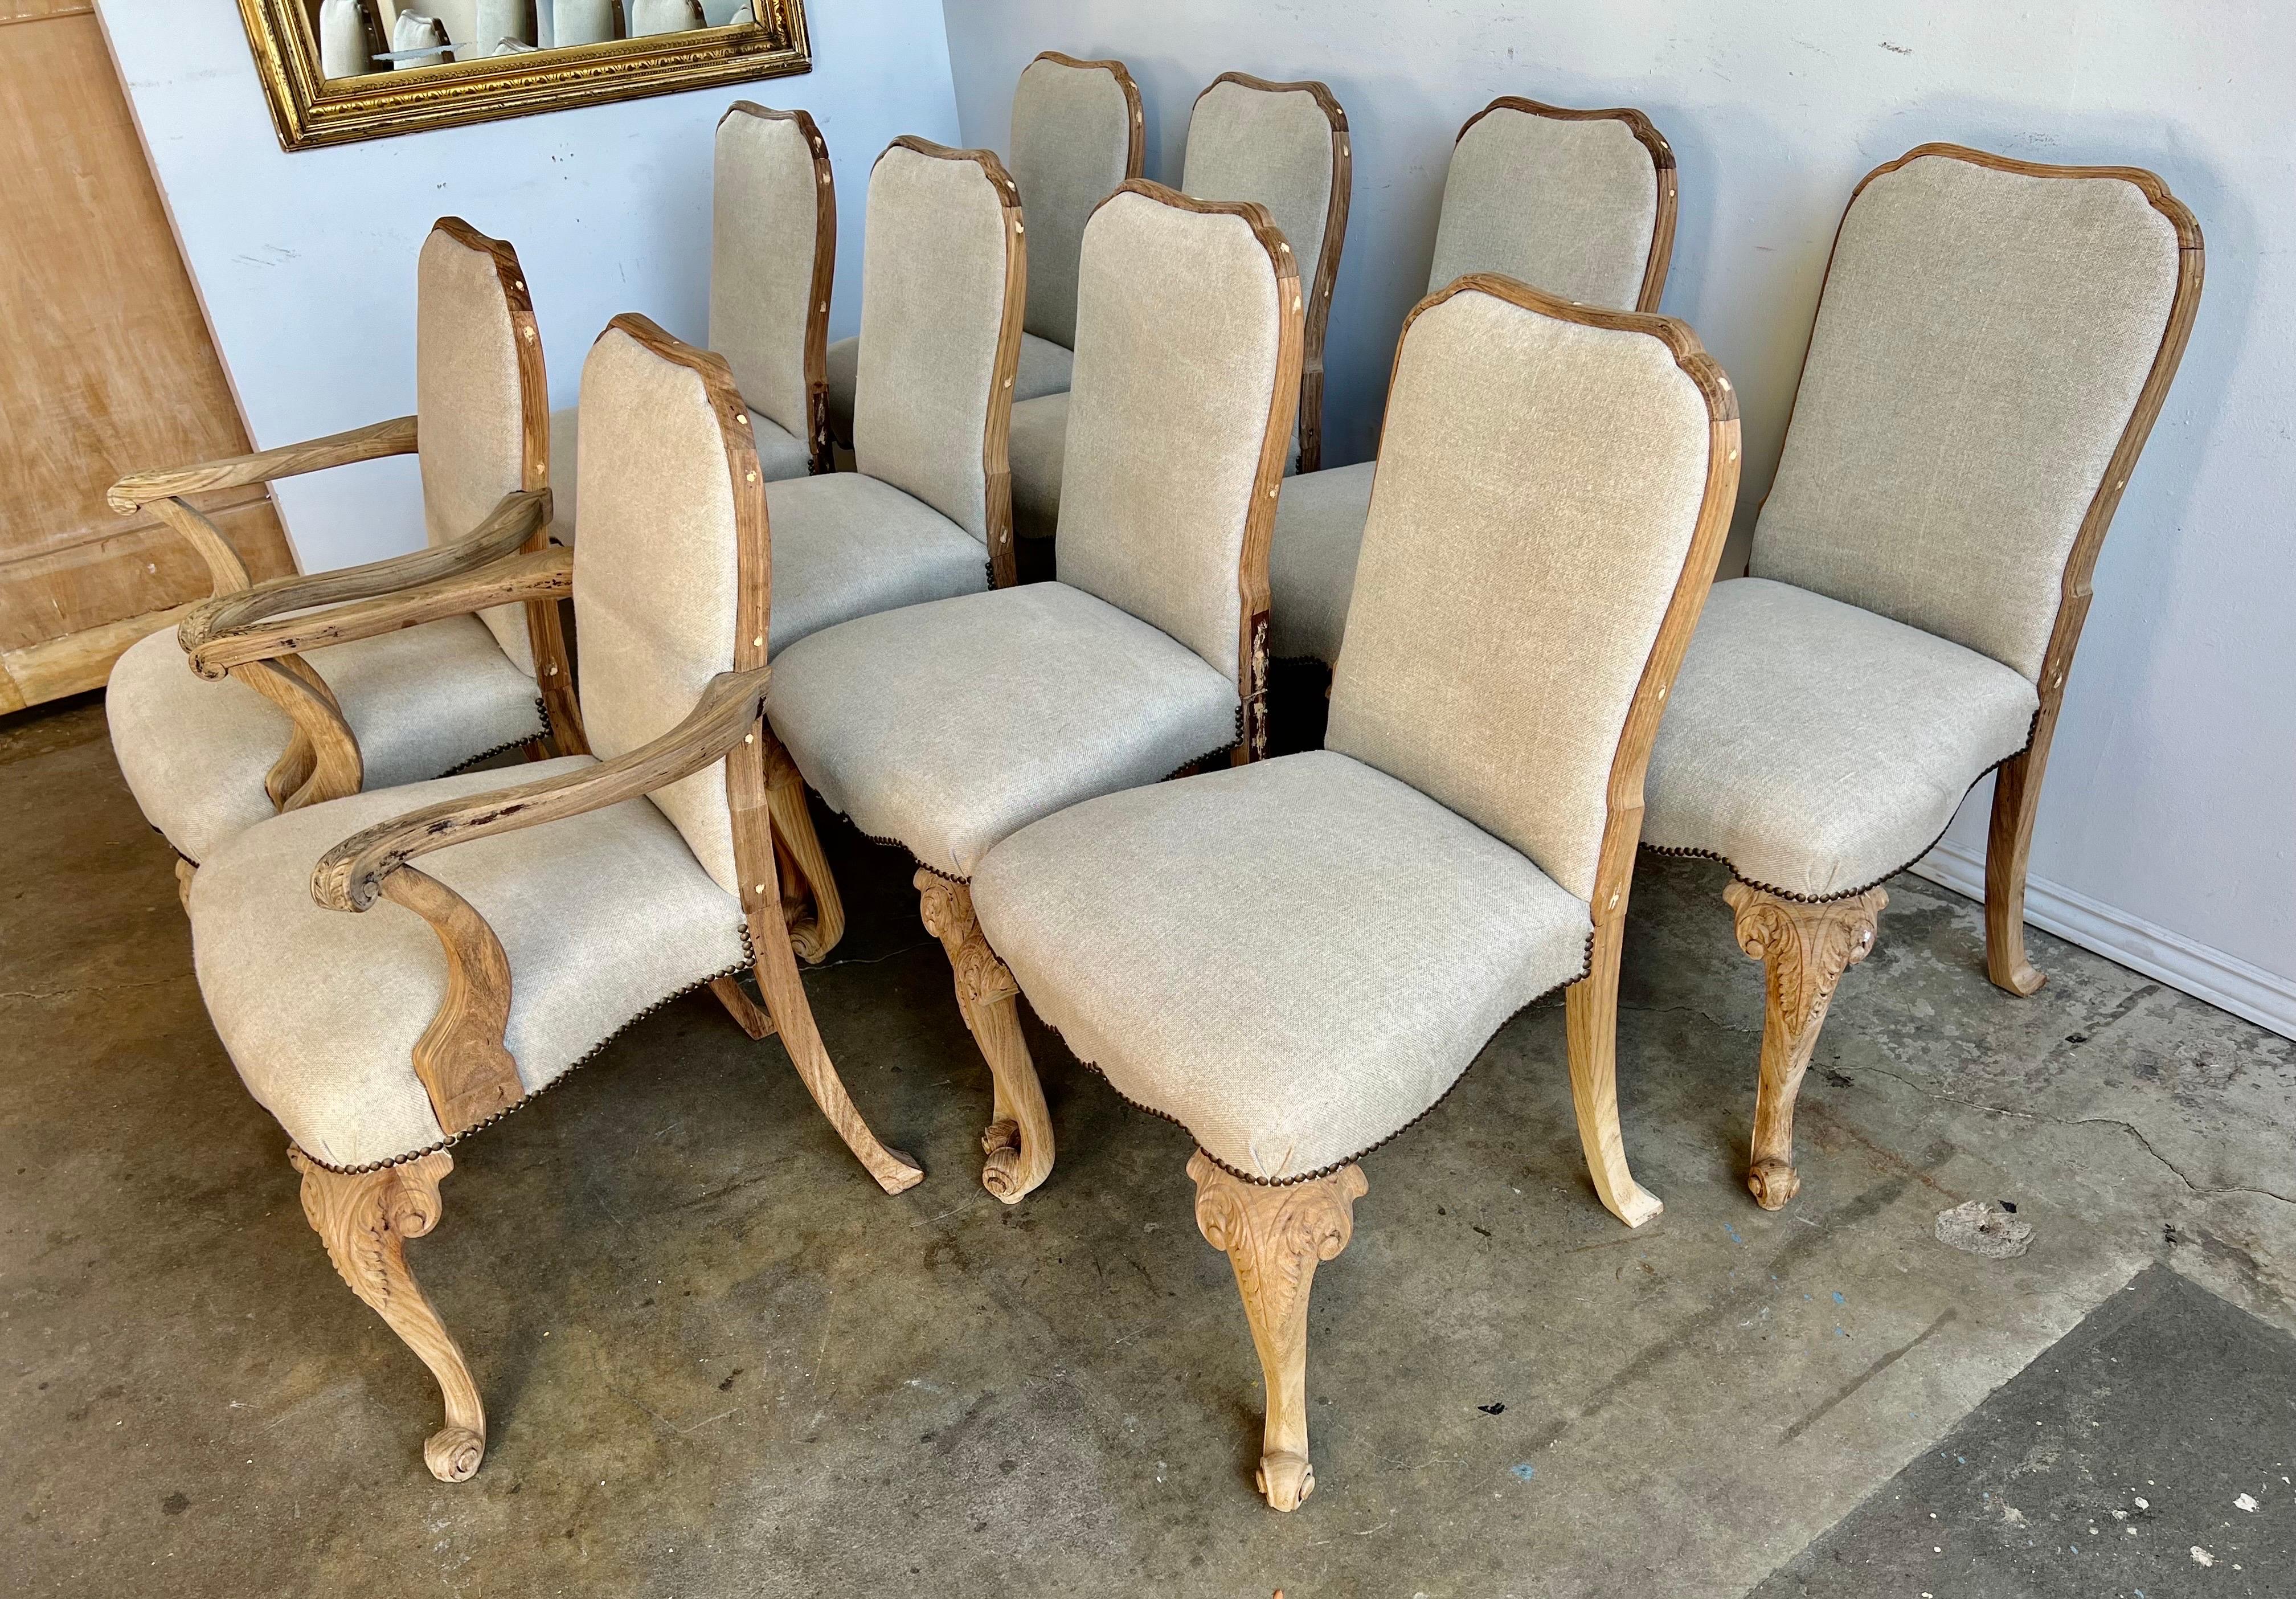 Bleached Set of Ten 19th C. French Dining Chairs